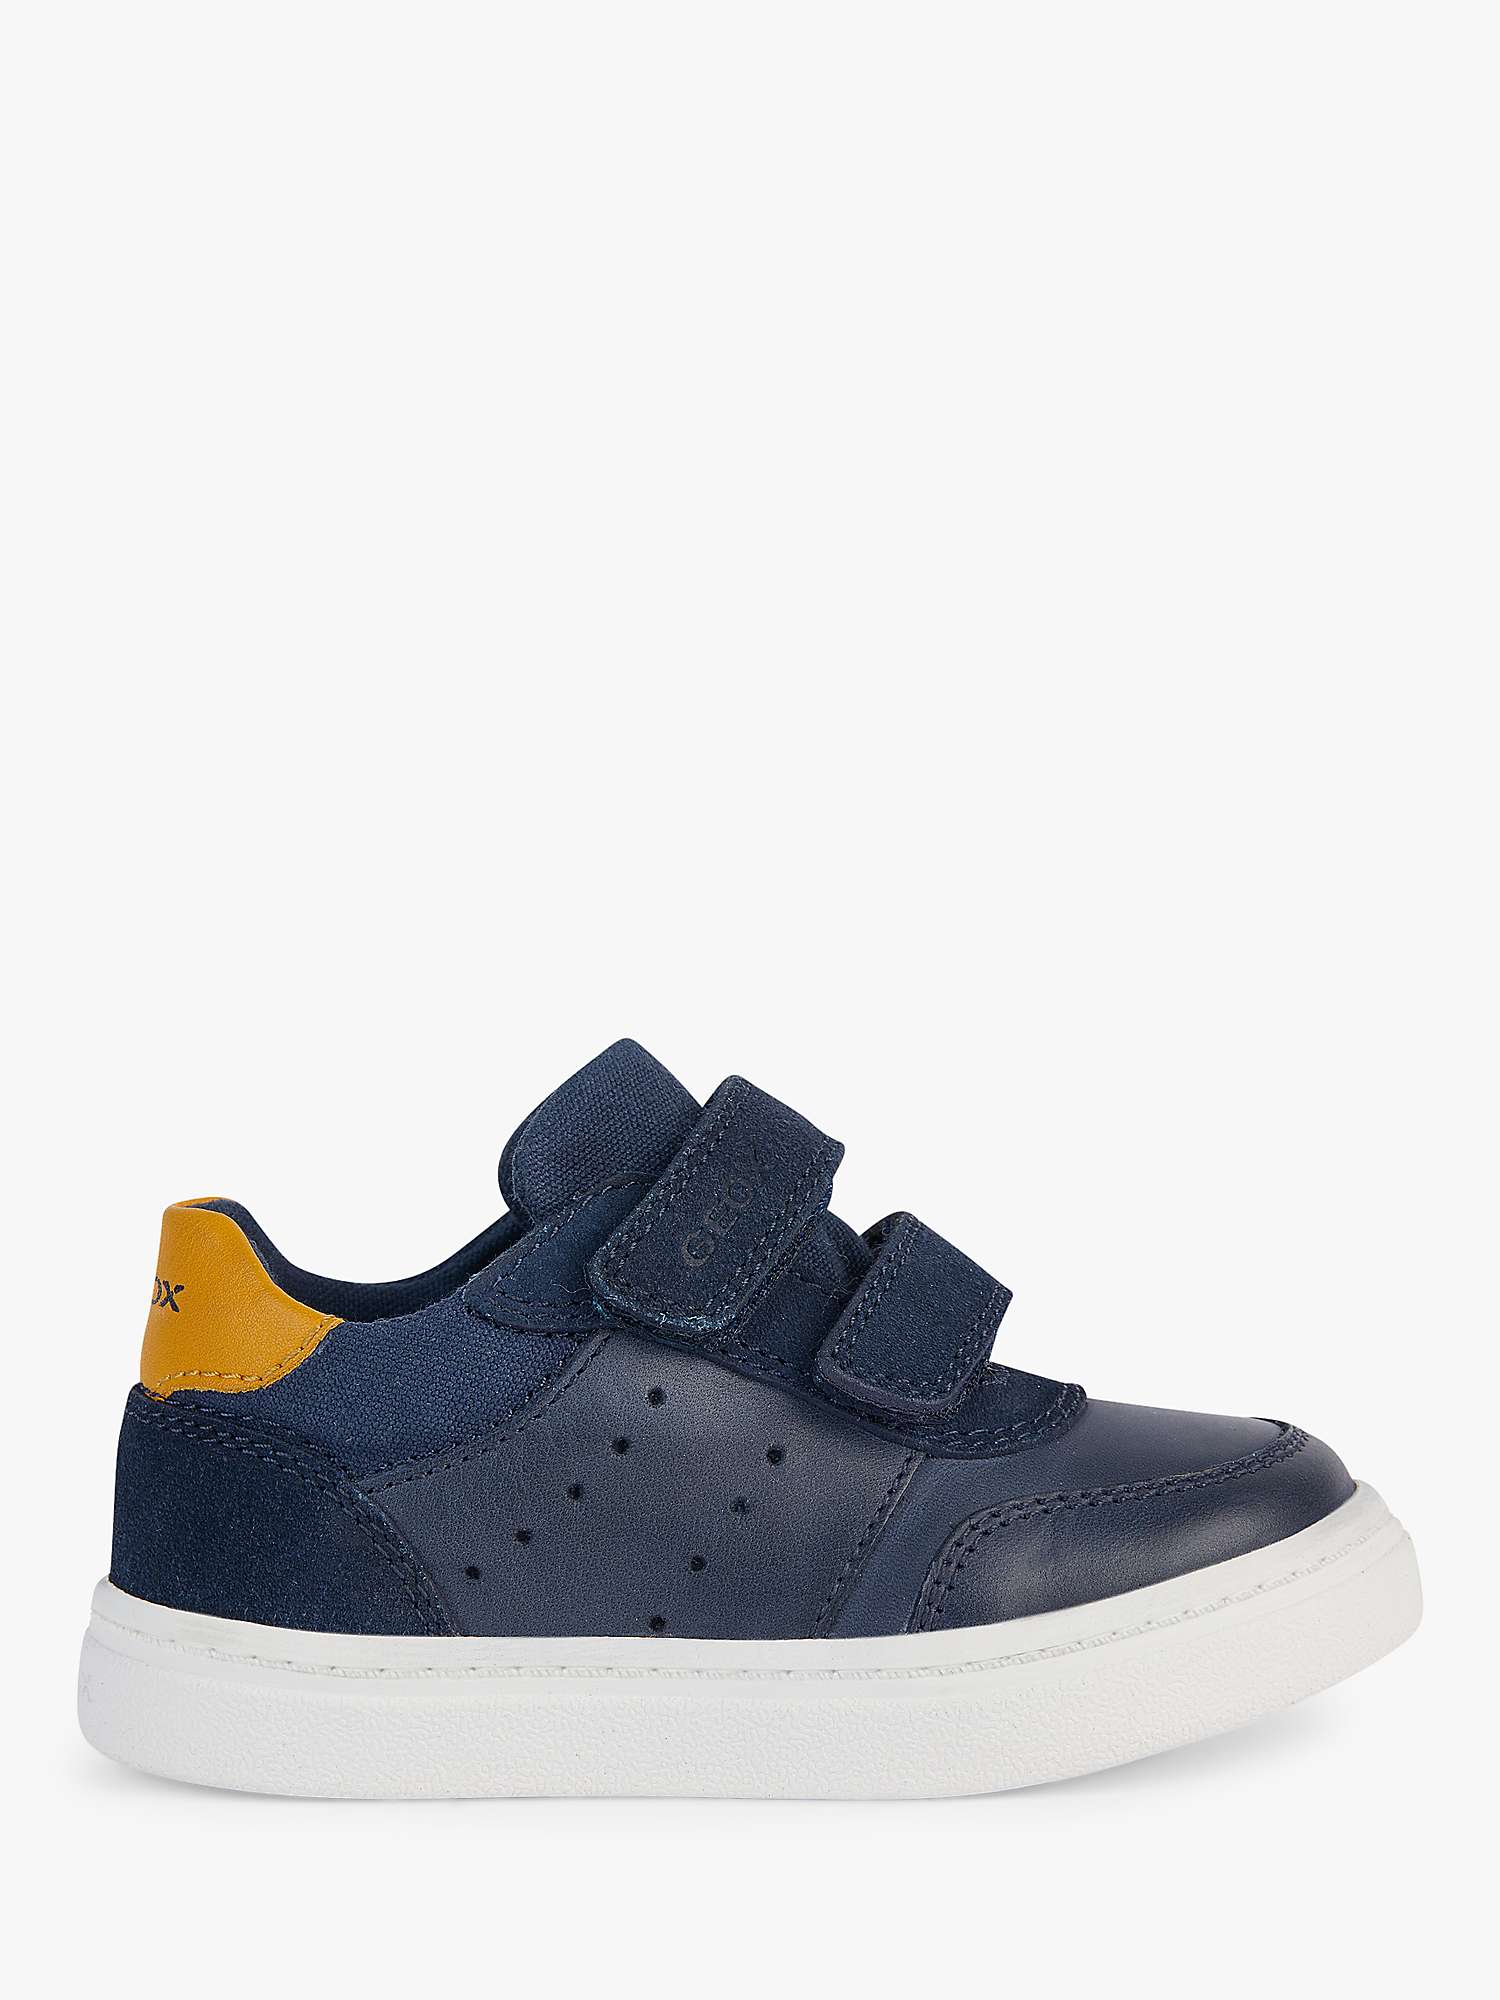 Buy Geox Baby Nashik Leather Blend First Steps Trainers, Navy/Ochre Online at johnlewis.com